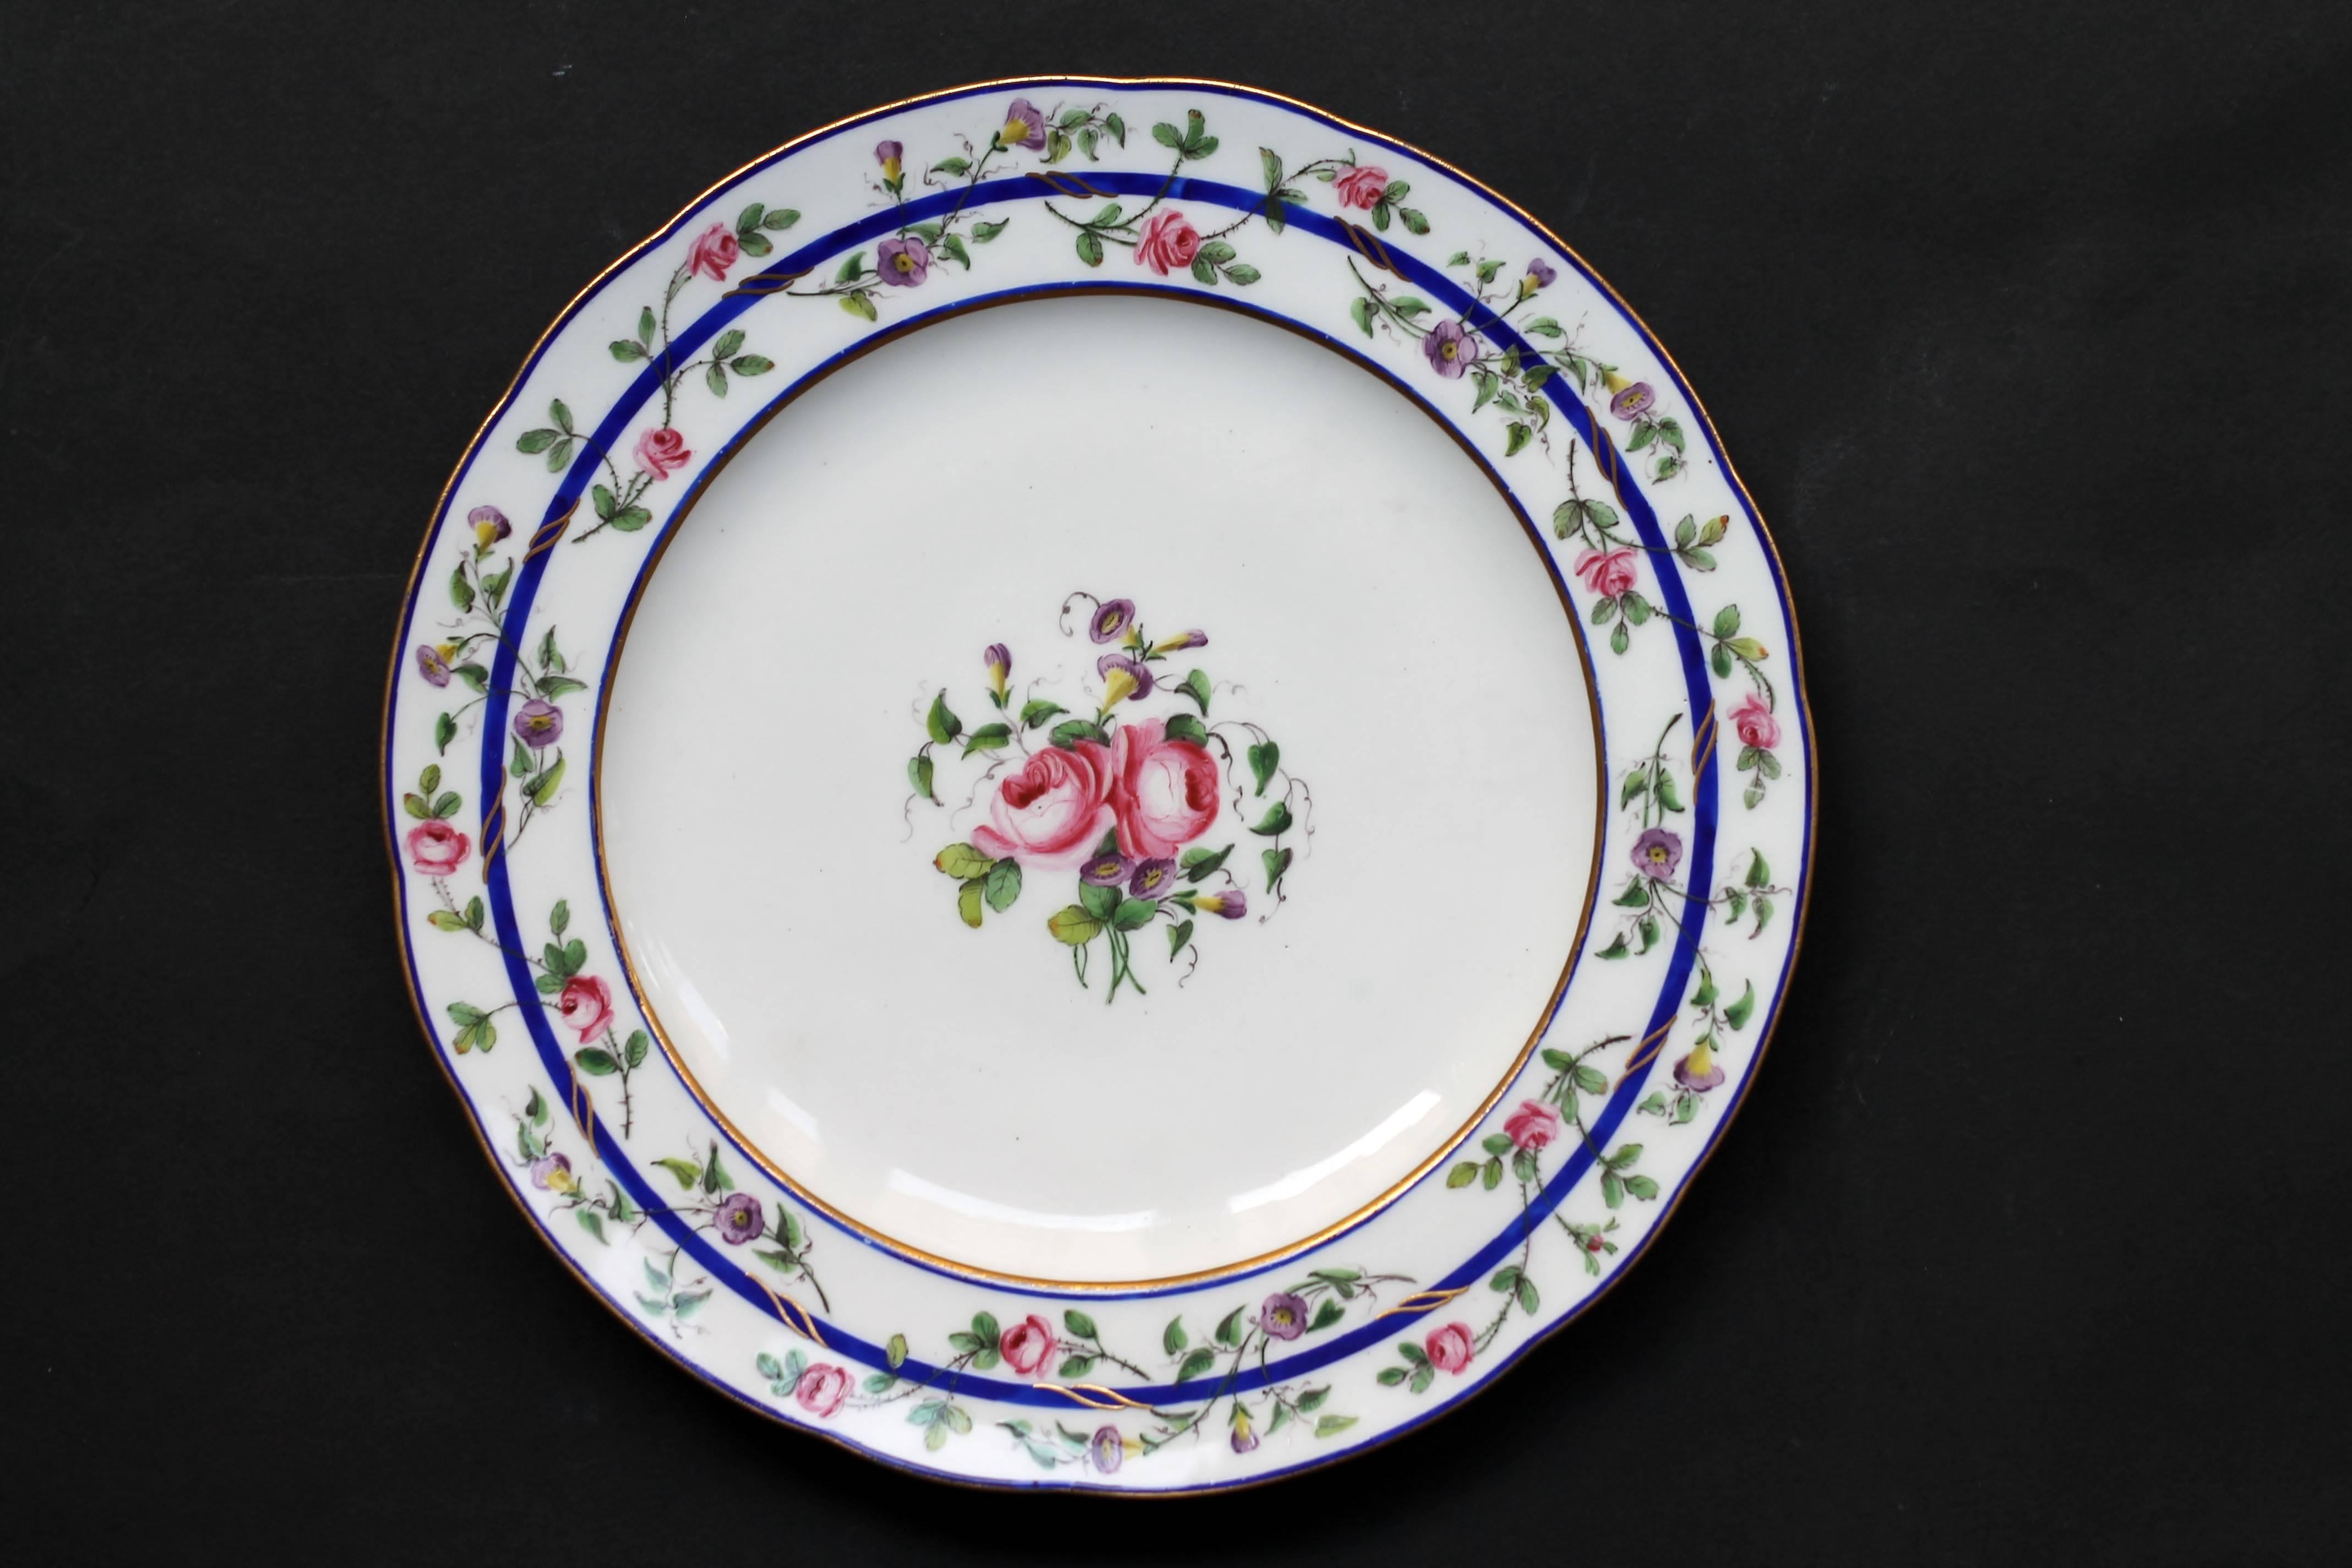 A Sevres porcelain (French) continuation of 12 plates (or 2x6) with polychrome decoration of garlands of pink and morning glory at the rim and flowers at the centre. Ligne in gold on the border.
Marked double L crossed for Sevres factory and 